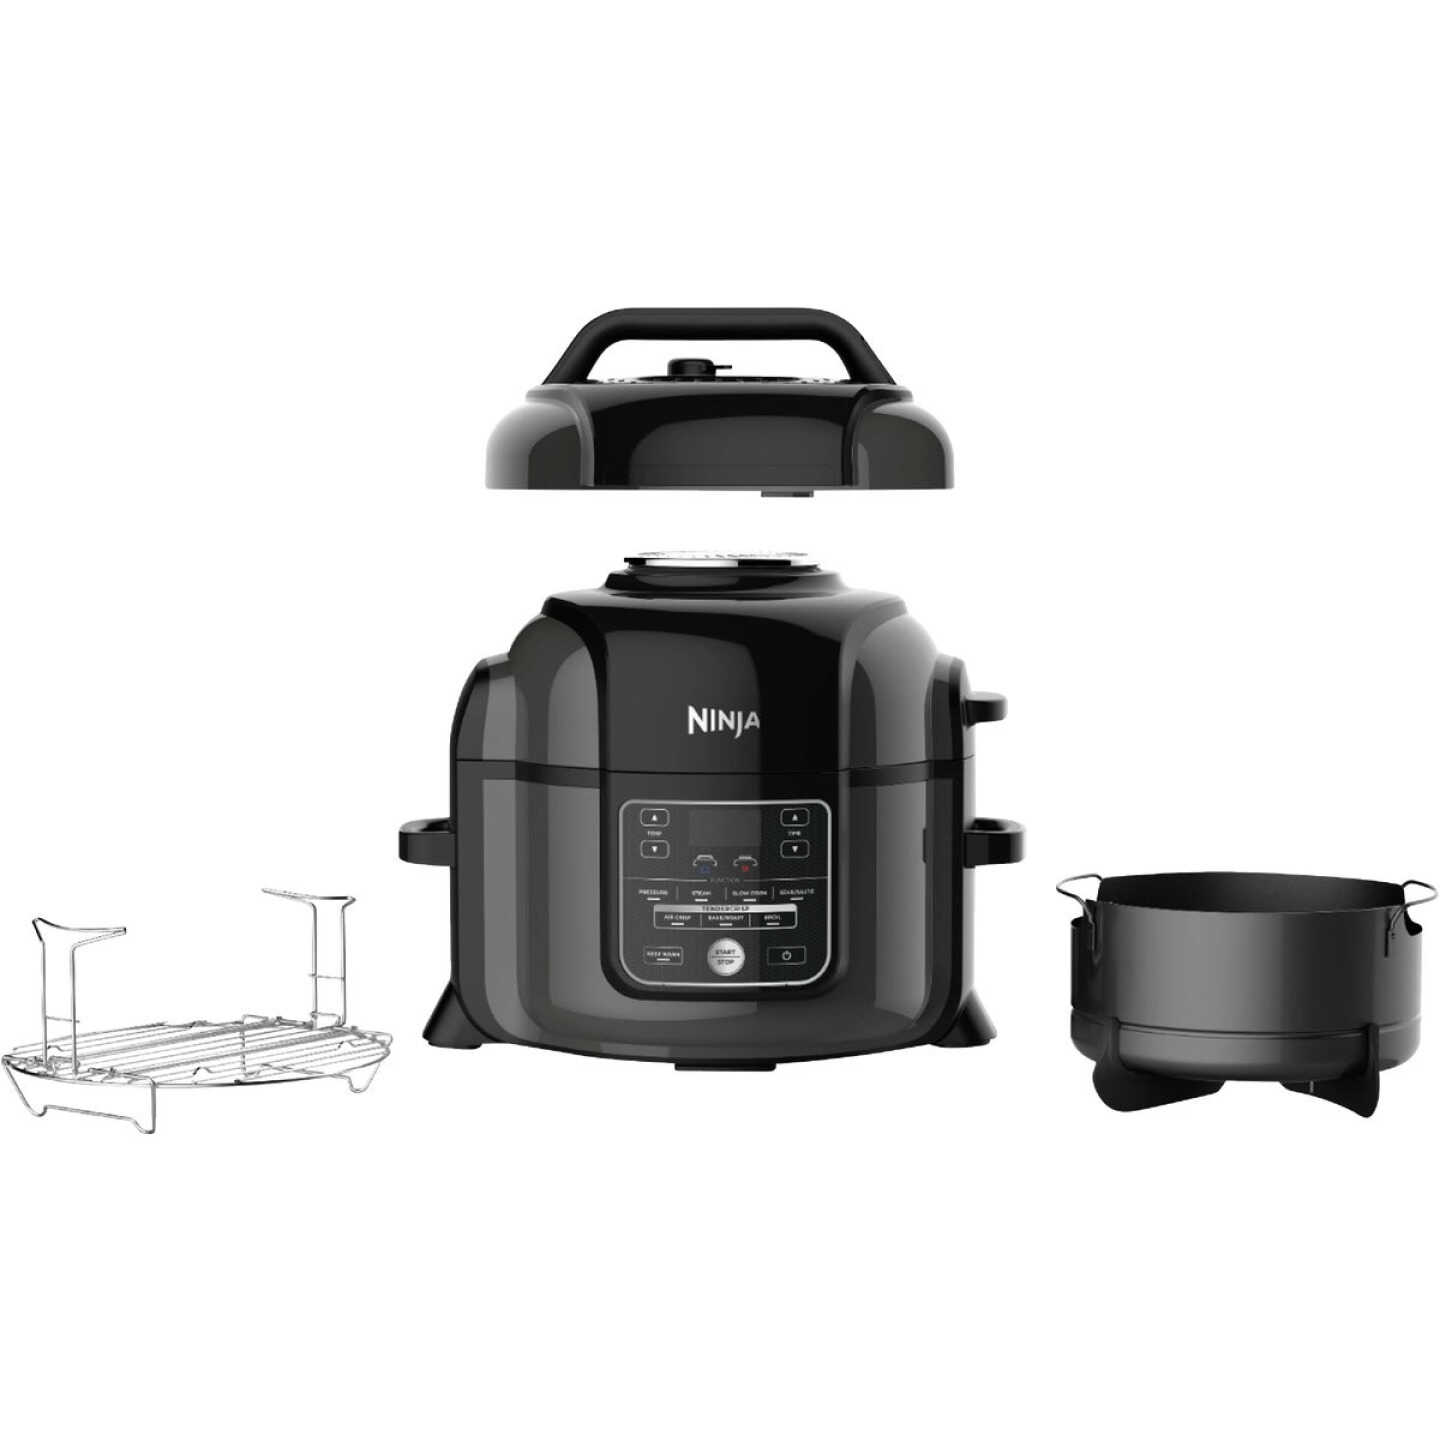 Instant Pot Duo 6 Qt. 7-in-1 Multi-Use Cooker - Randy's Hardware